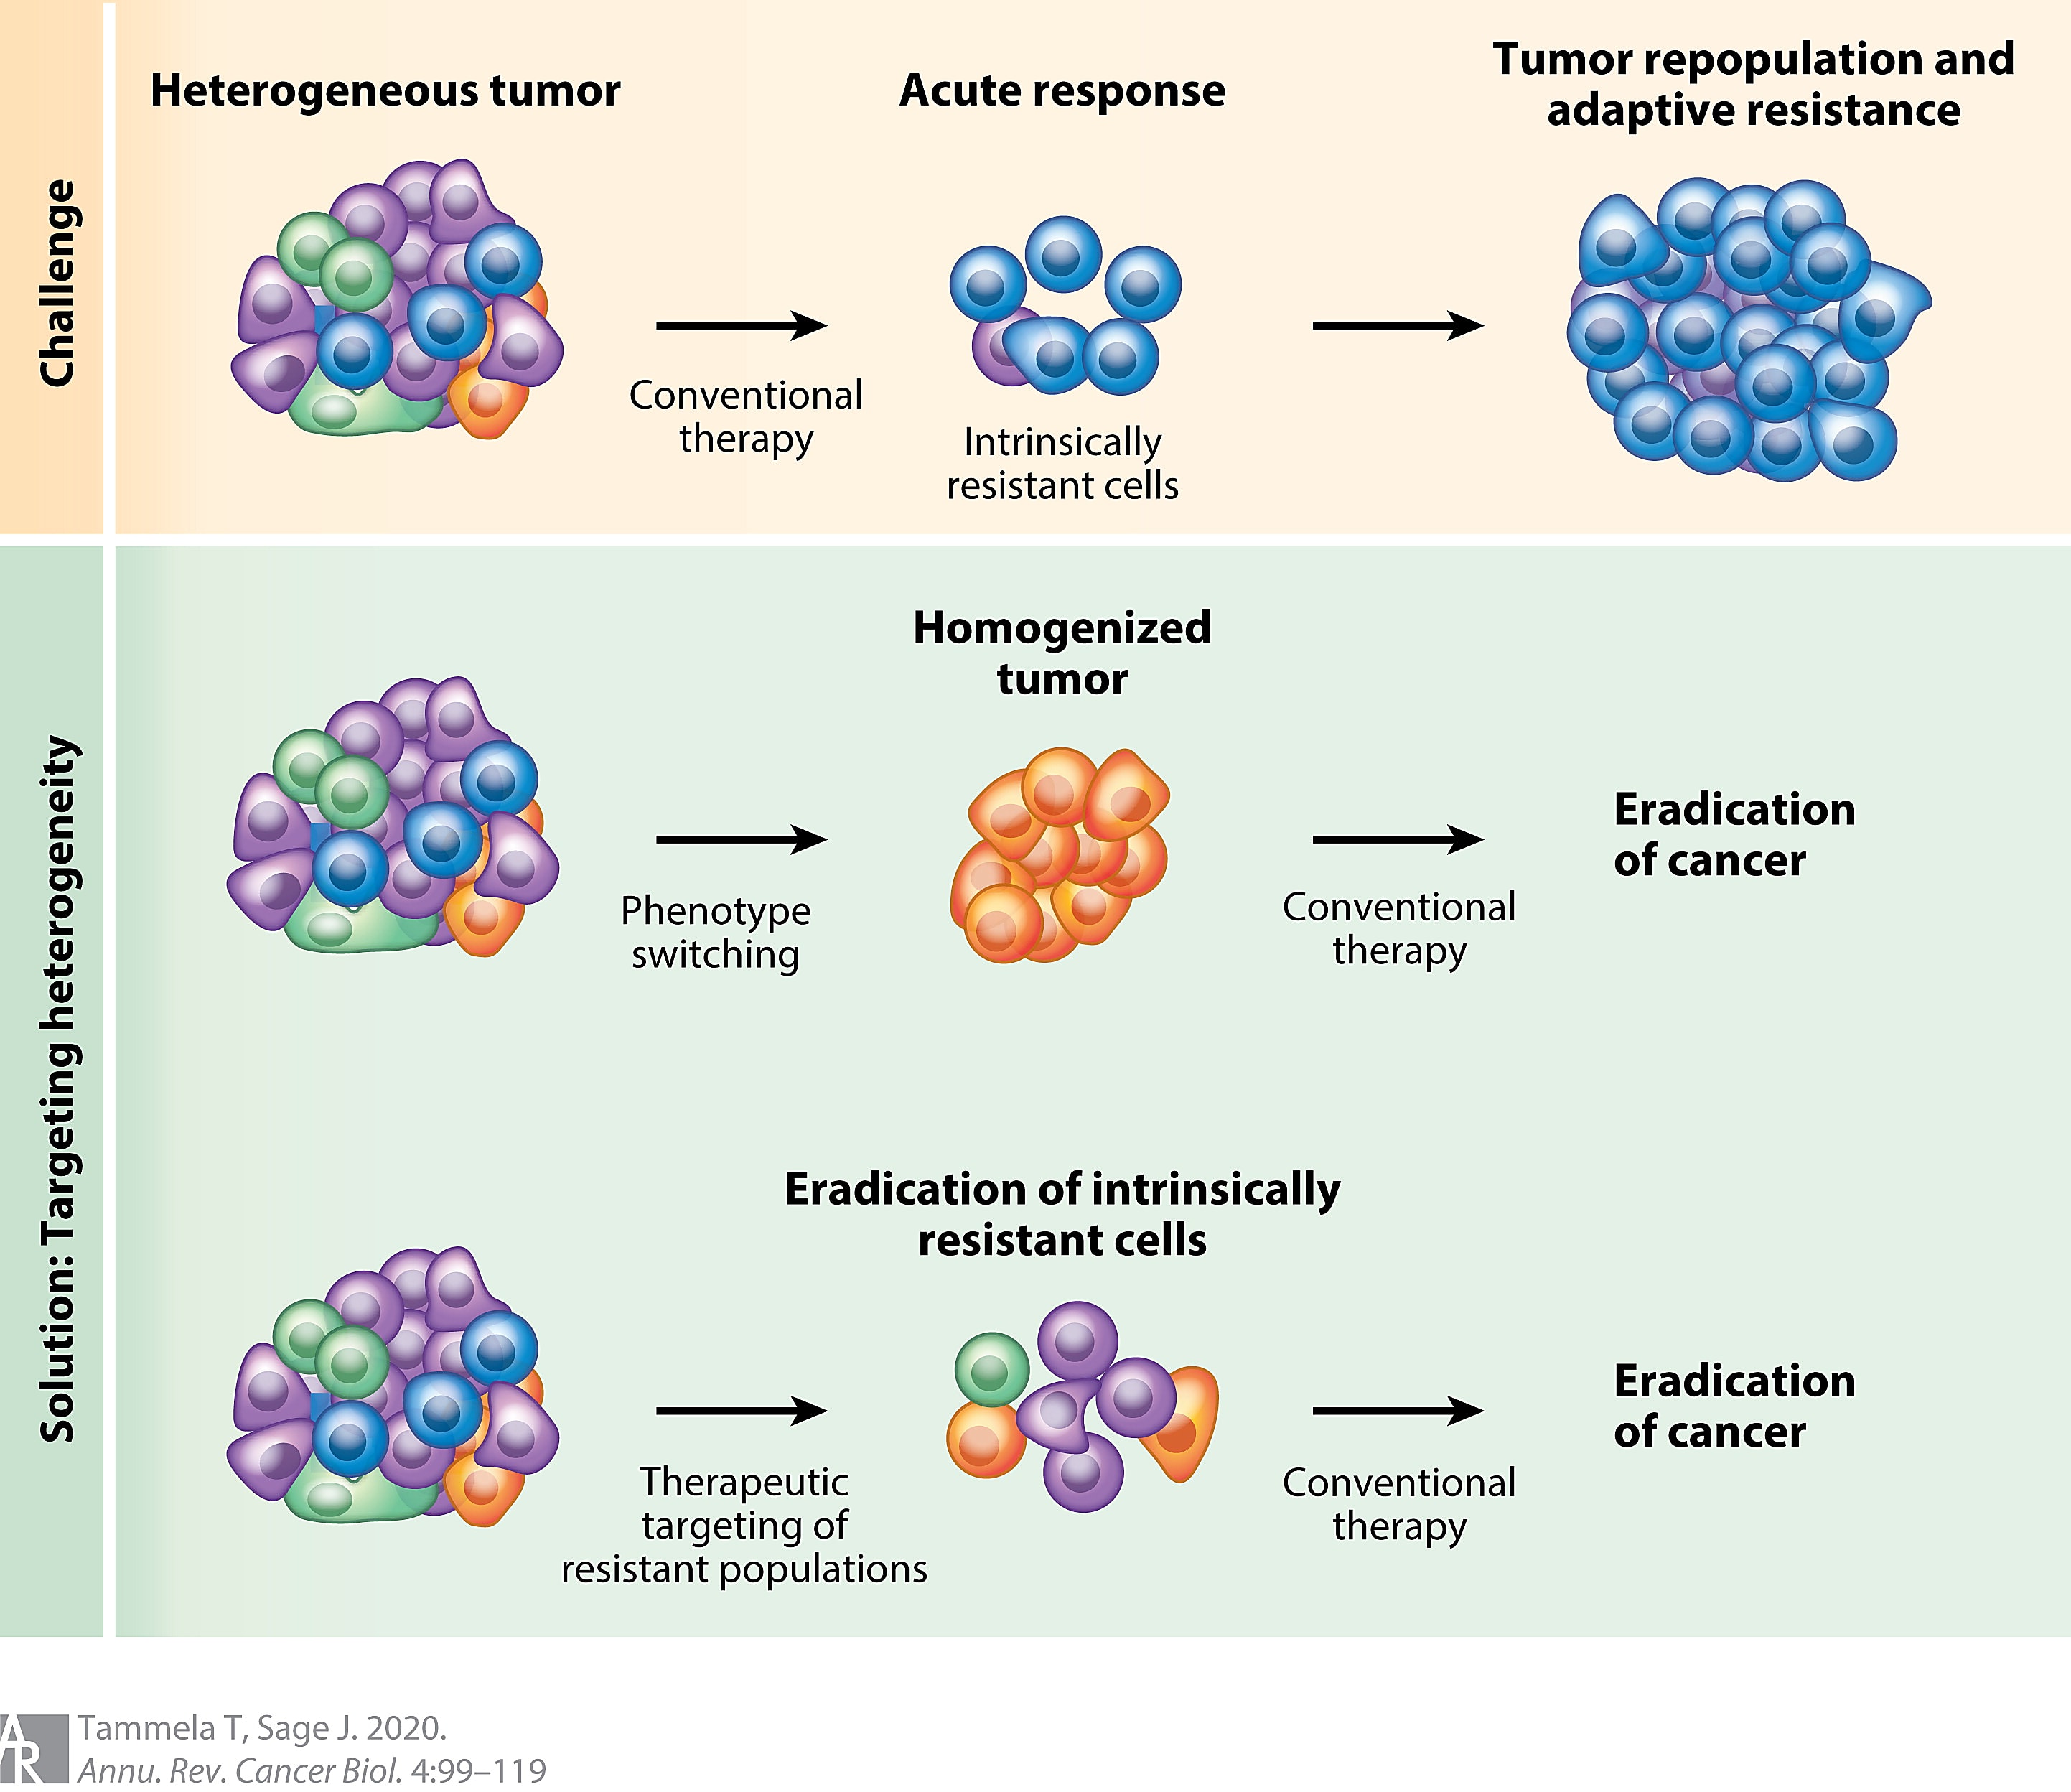 Figure 1. Natural selection complicates treatment of highly heterogeneous tumors. Intrinsically resistant cells within a tumor often survive treatment and quickly form a highly treatment-resistant tumor. Effective treatments against heterogeneous tumors must eliminate resistant cells by targeting them before conventional therapy. Treatment strategies include pushing cells to respond via phenotype switching or specifically eliminating resistant cells (Tammela T and Sage J. Annu Rev Cancer Biol 4: 99–119 (2020).).